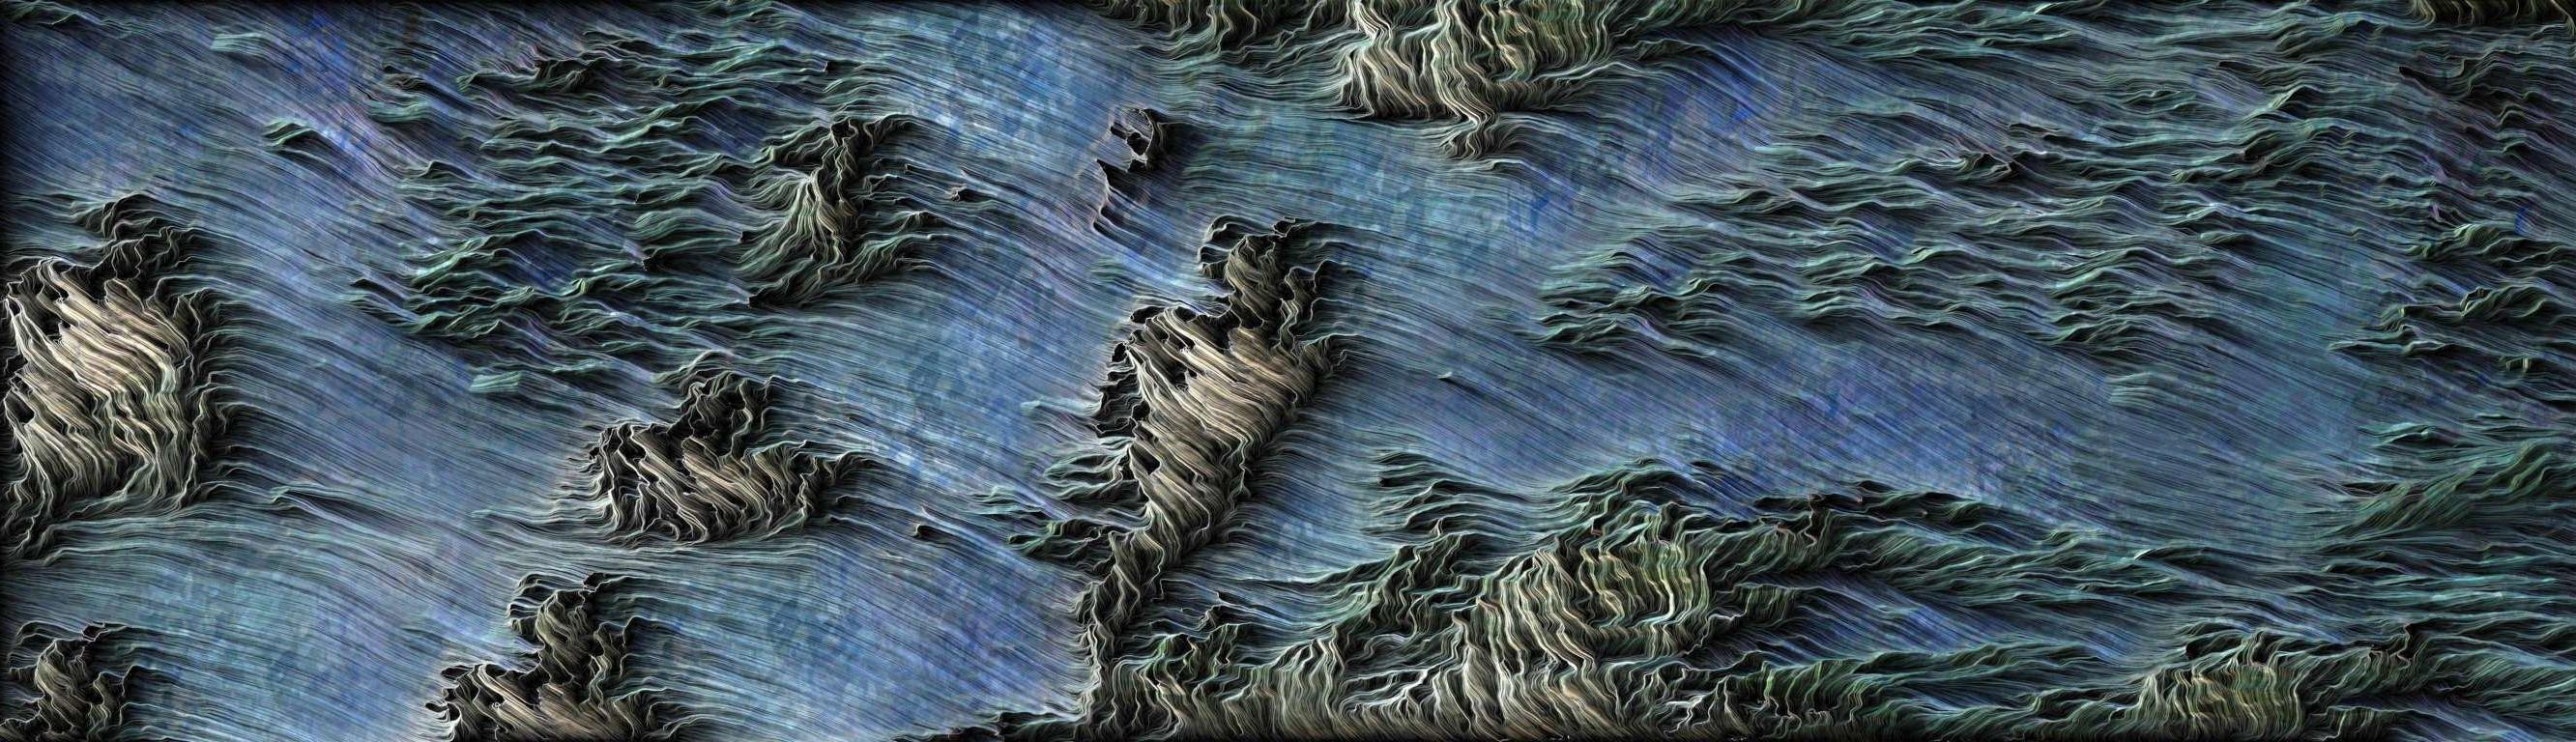 Peruvian Streams, abstract digital artwork in blues, engraved on aluminum